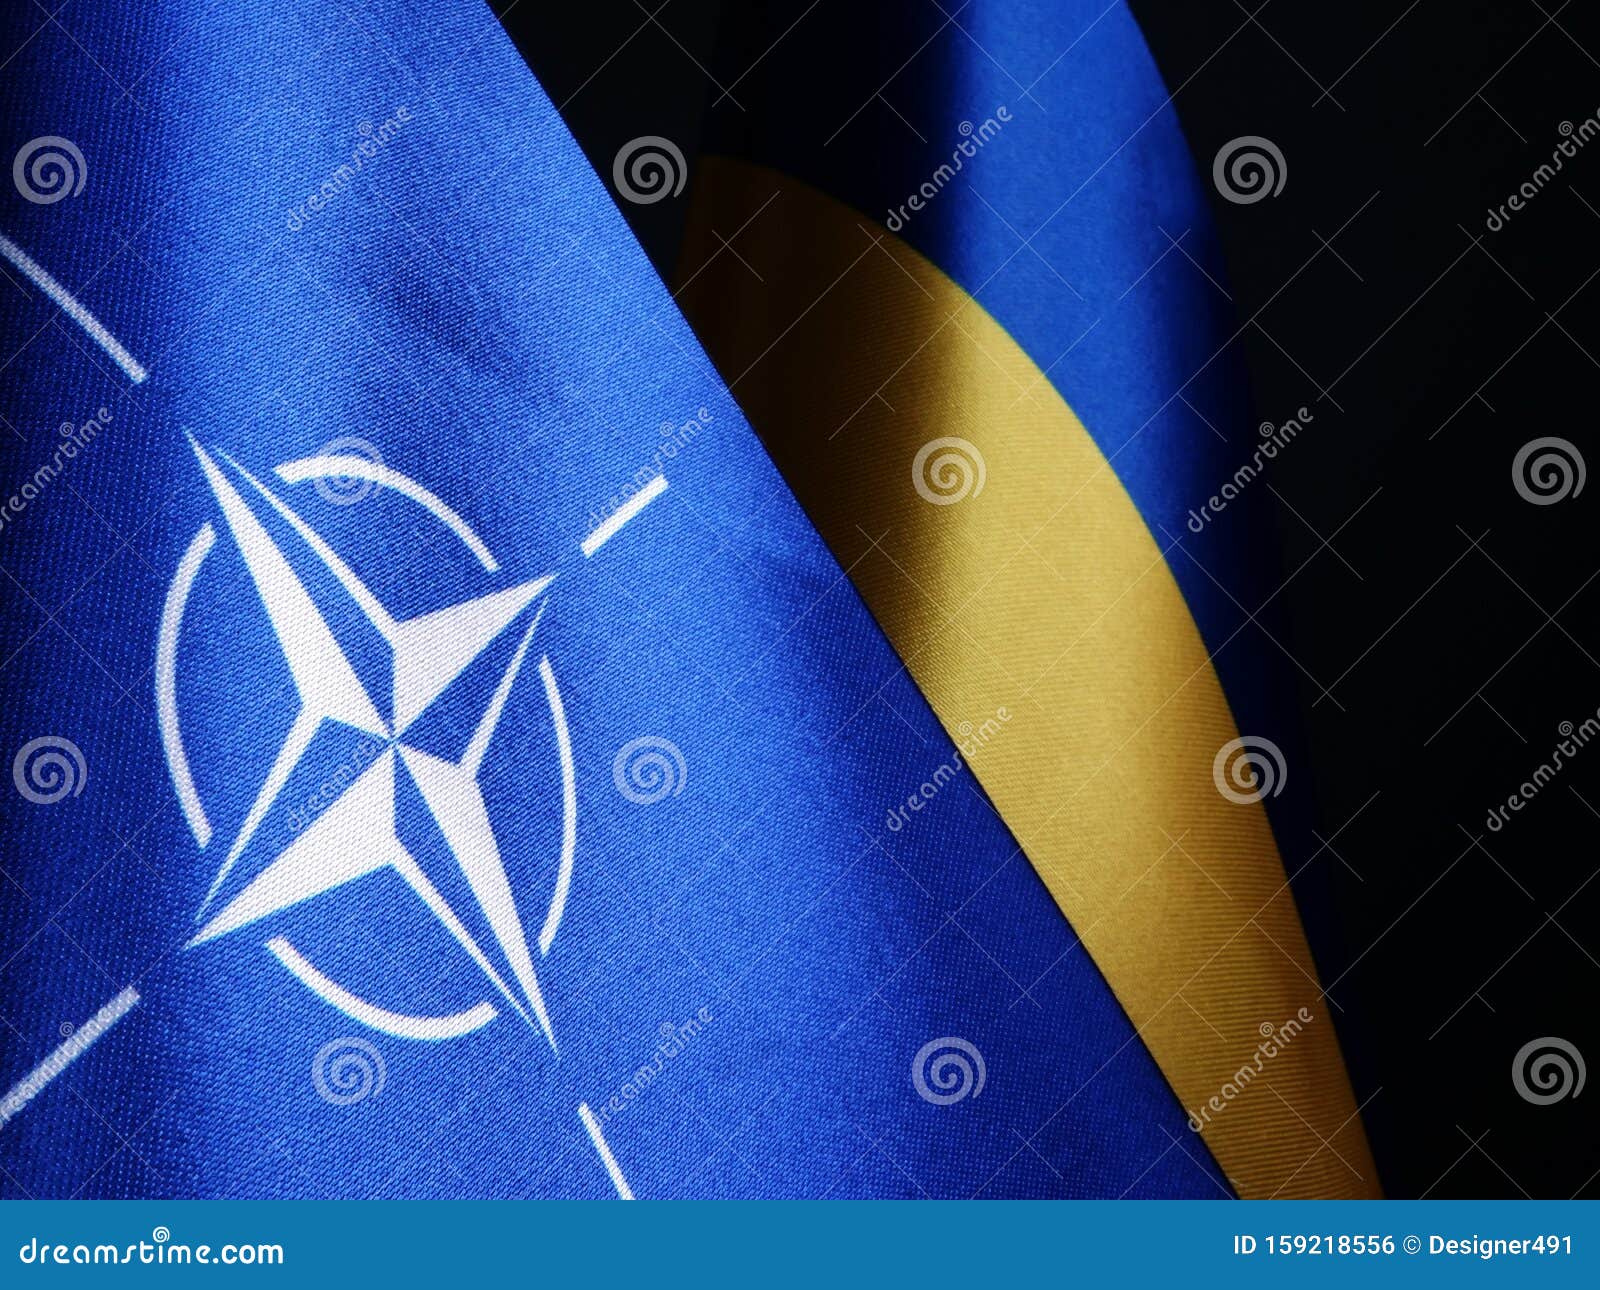 nato and ukraine flags as  of cooperation